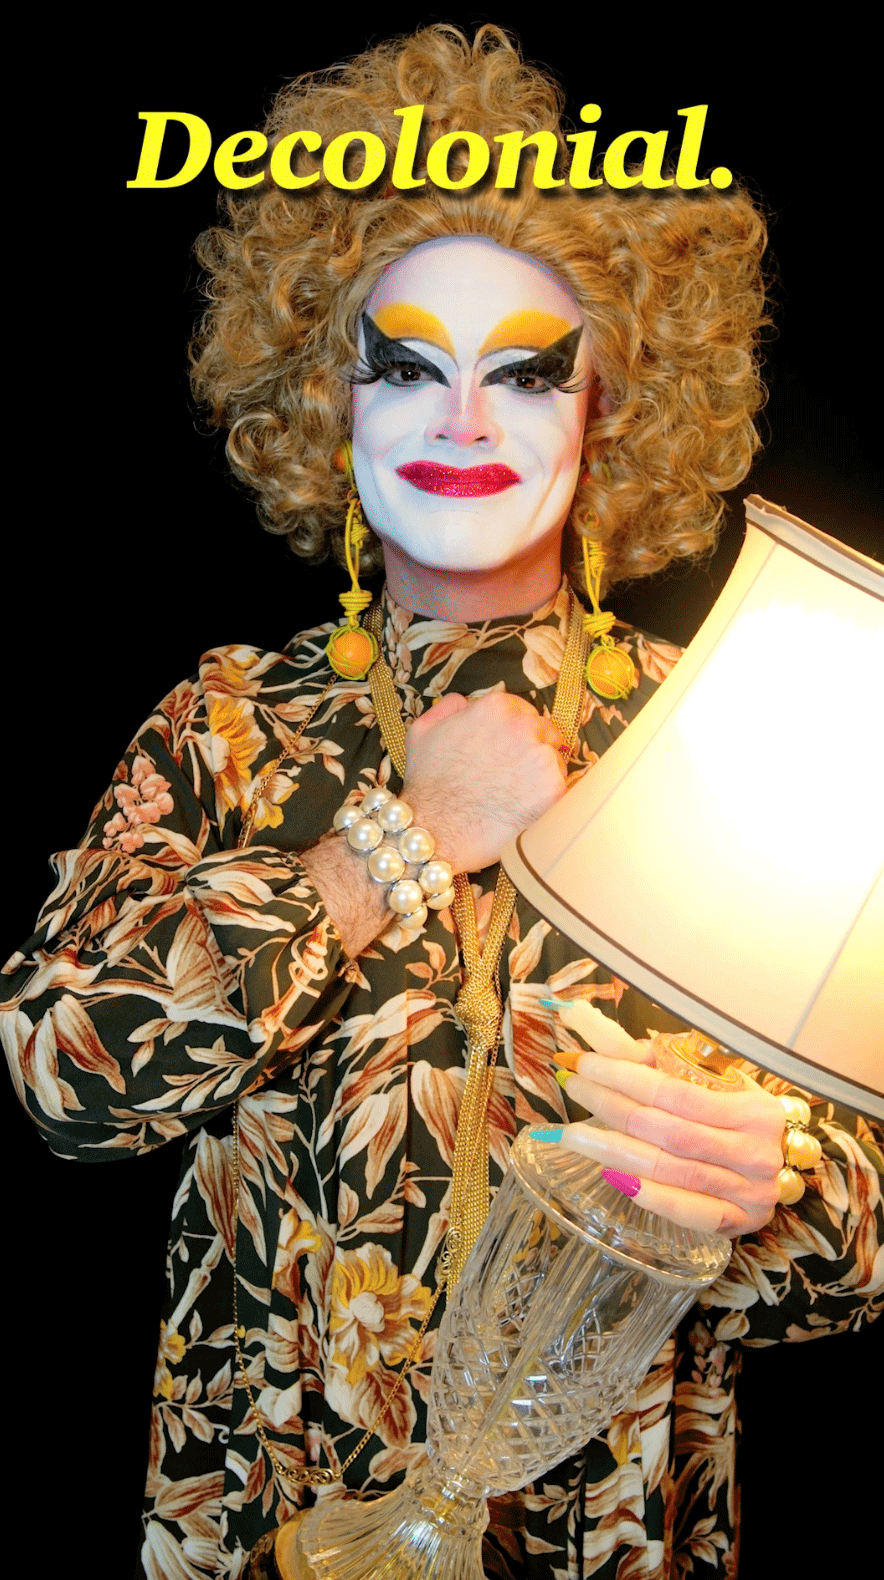 A drag queen clown with a large blonde wig holds a lamp 